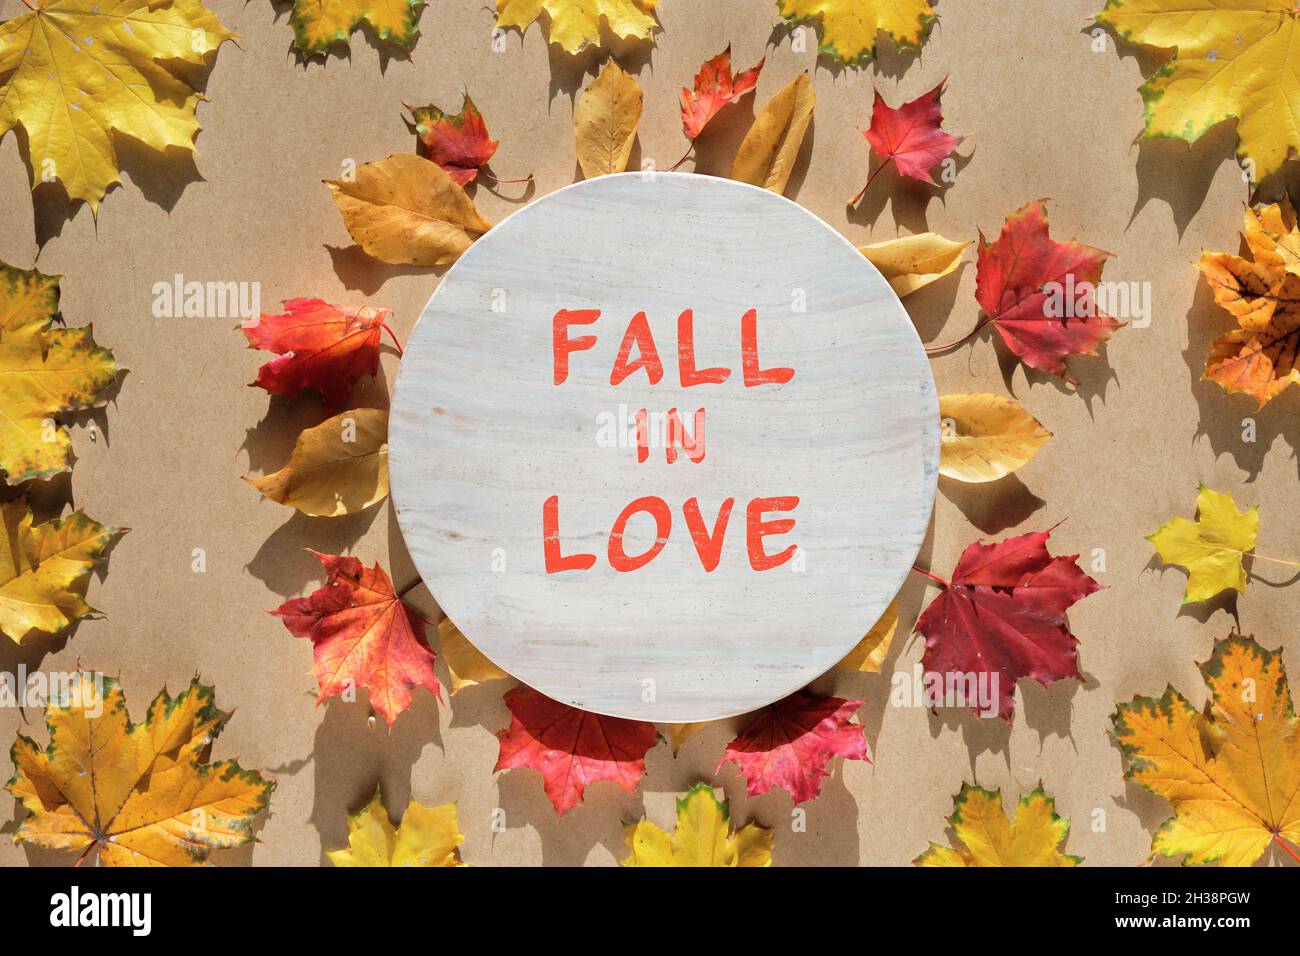 Round autumn frame made with natural Fall leaves, yellow and bright vibrant red. Maple leaves around stone board. Text Fall in Love. Creative Stock Photo